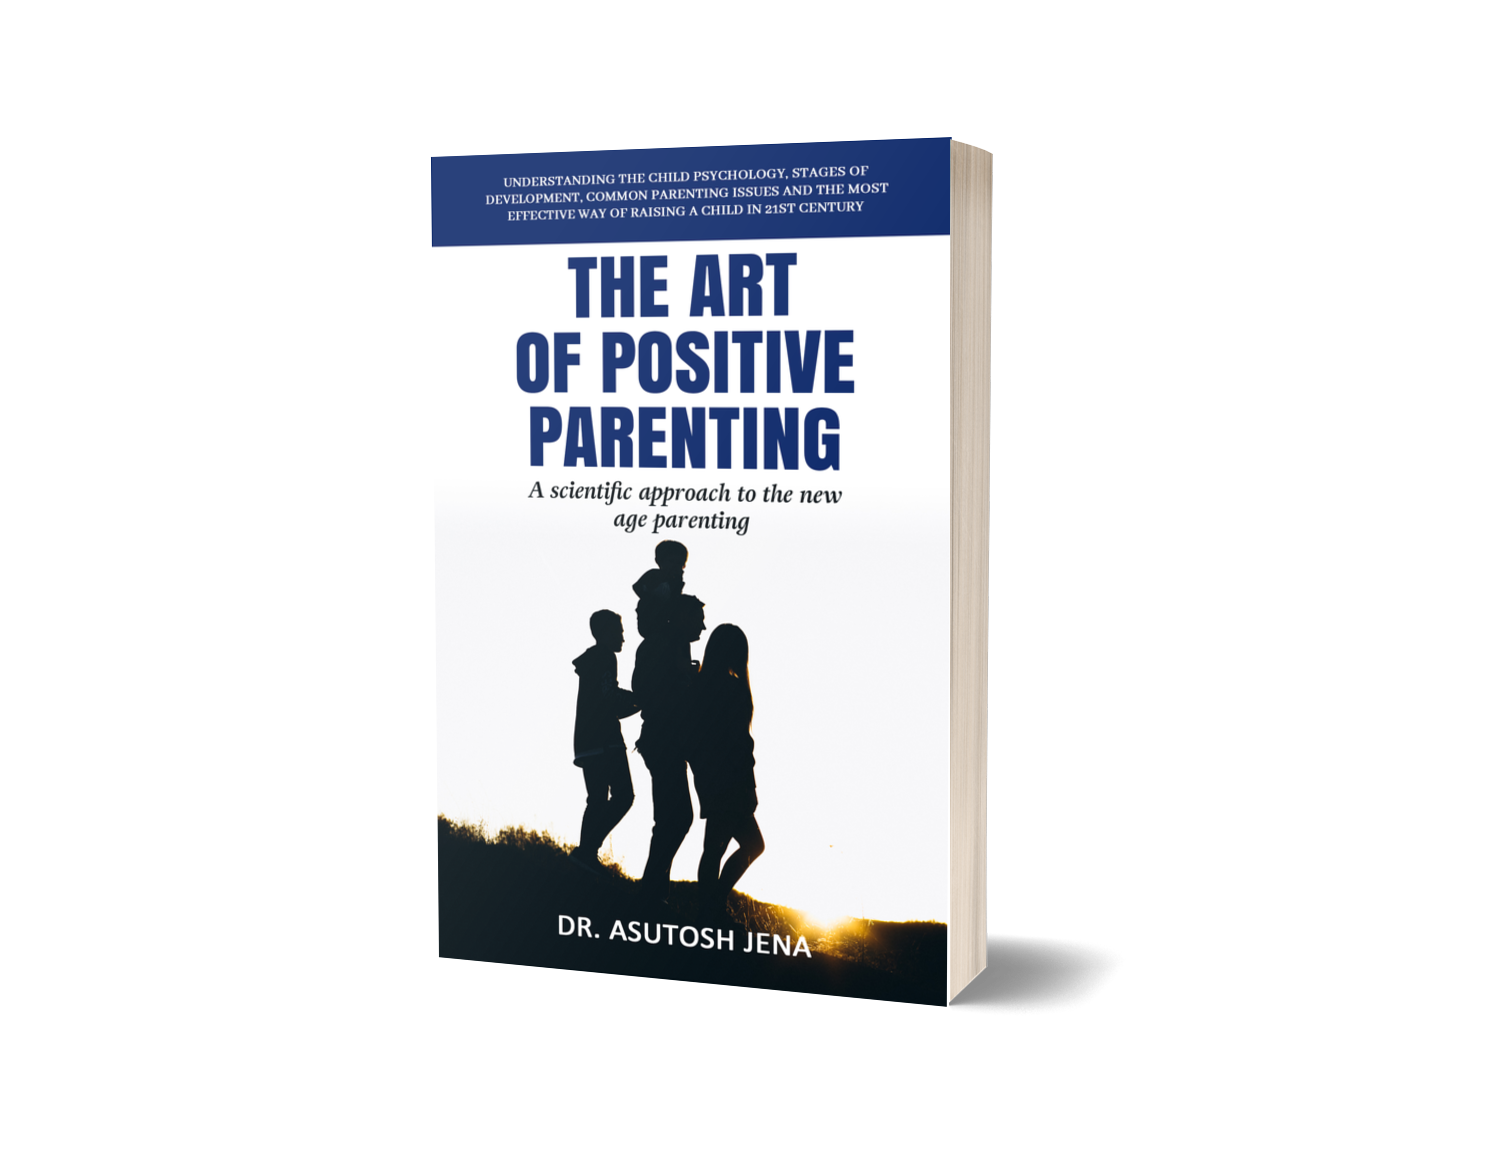 The Art of Positive Parenting